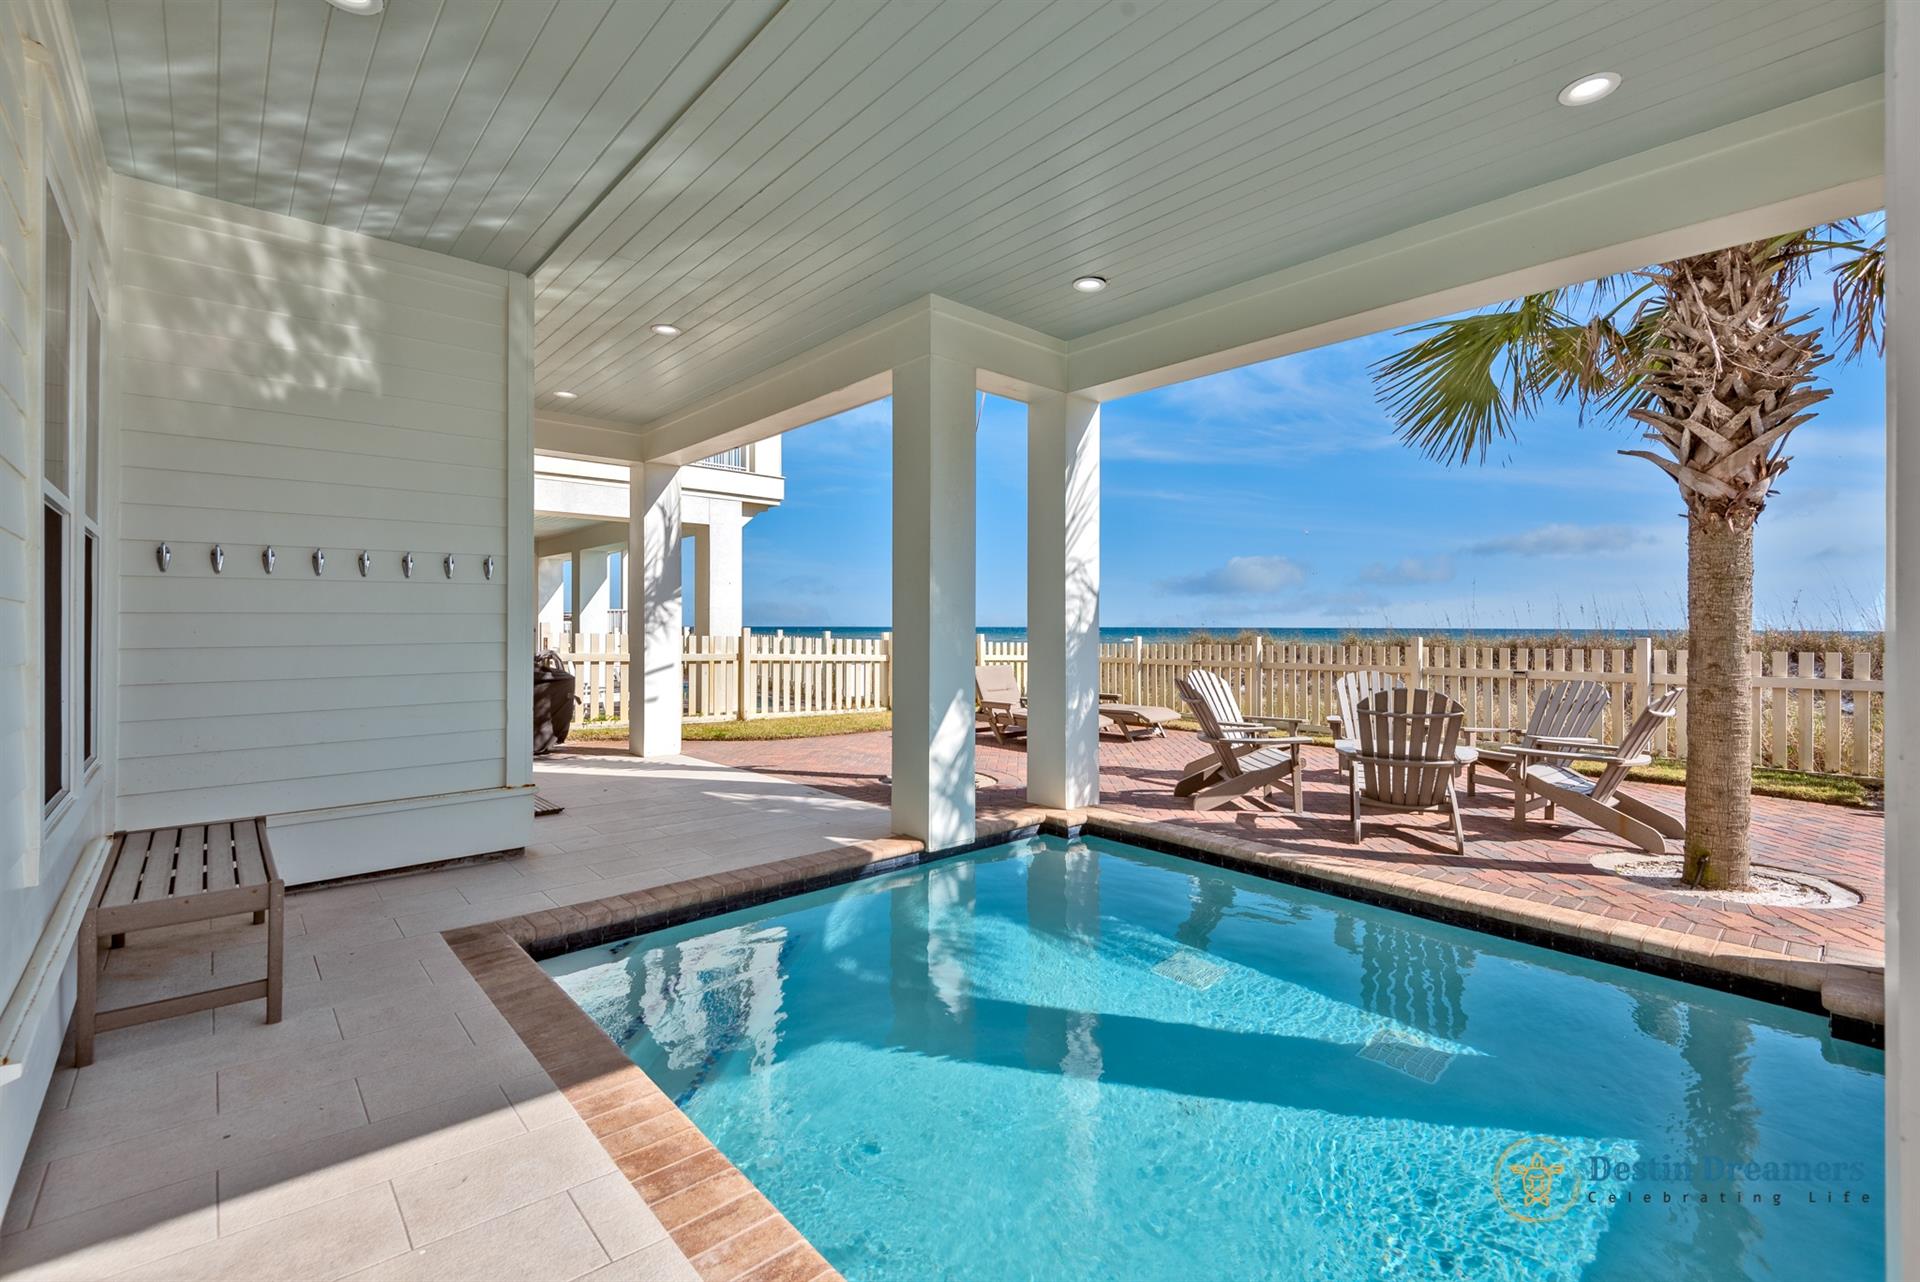 Heated, private pool with ocean views, outdoor seating, lounge chairs, and grill.